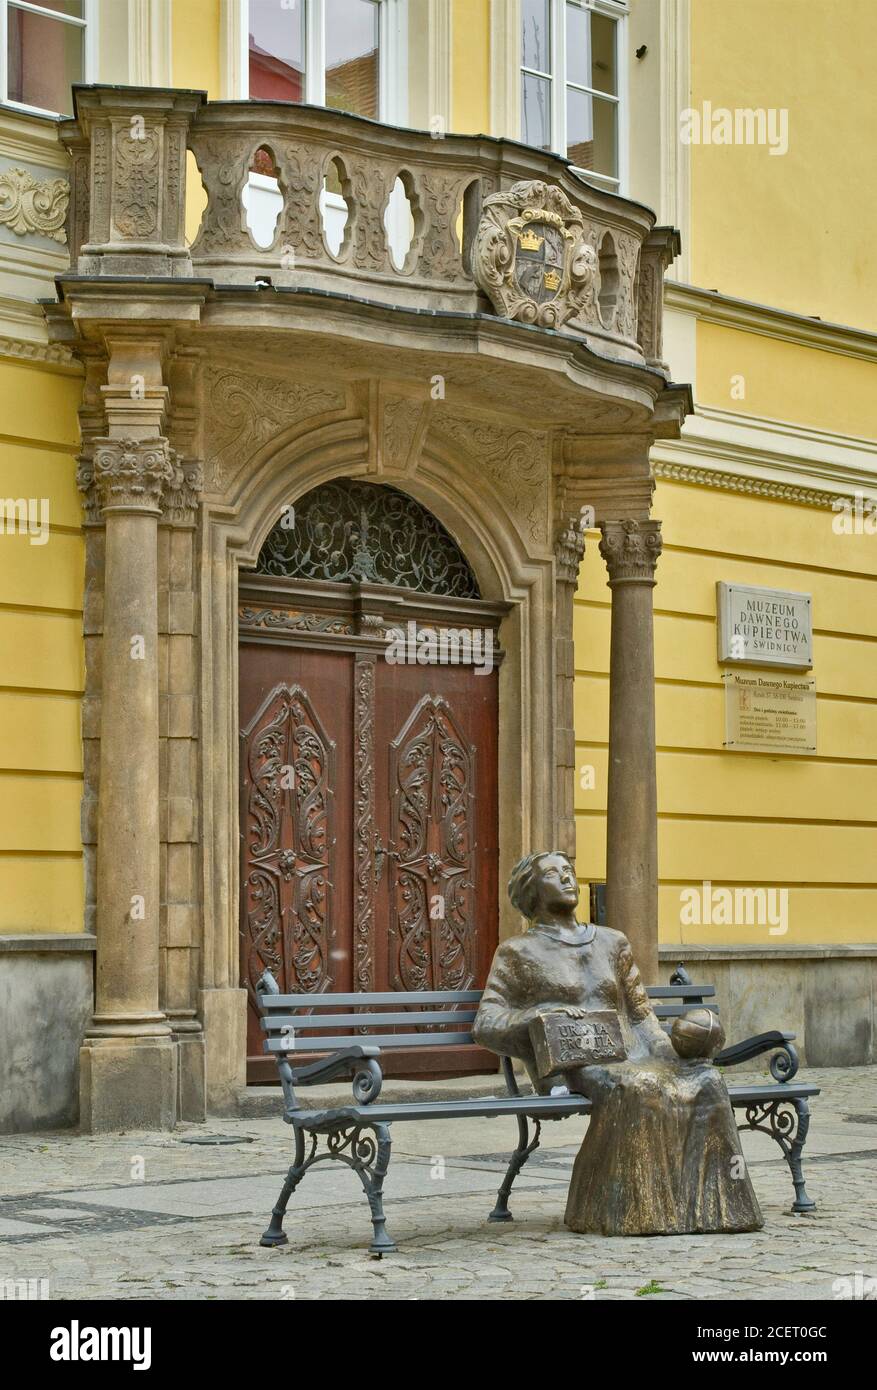 Memorial to Maria Cunitz, 18th century female astronomer, Early Commerce Museum in Ratusz (Town Hall) in Świdnica, Lower Silesia, Poland Stock Photo